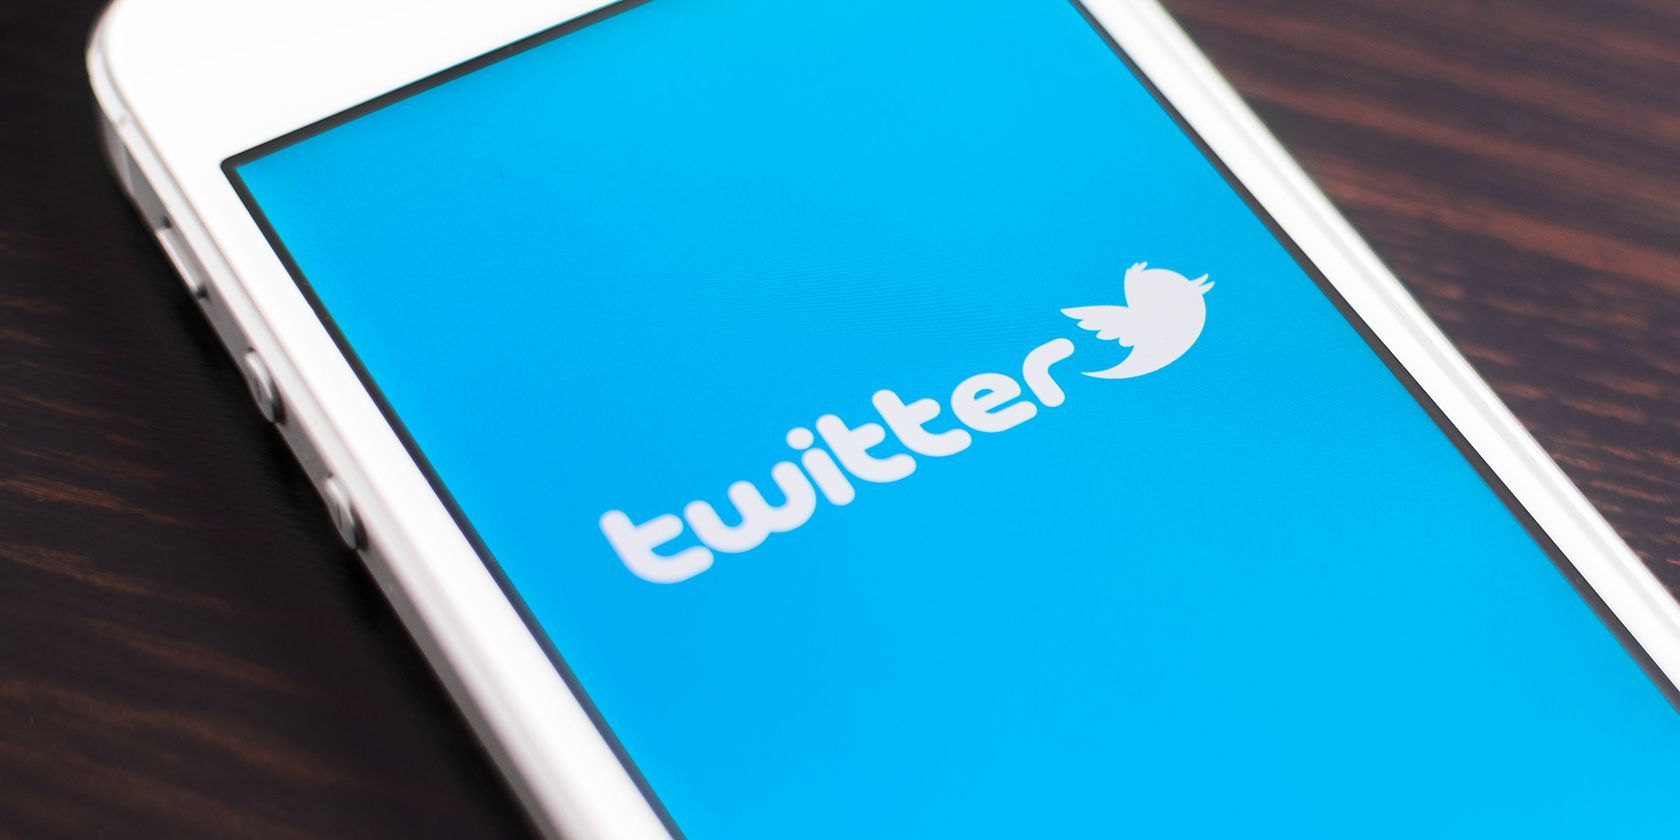 A mobile phone displays the twitter logo on a blue background